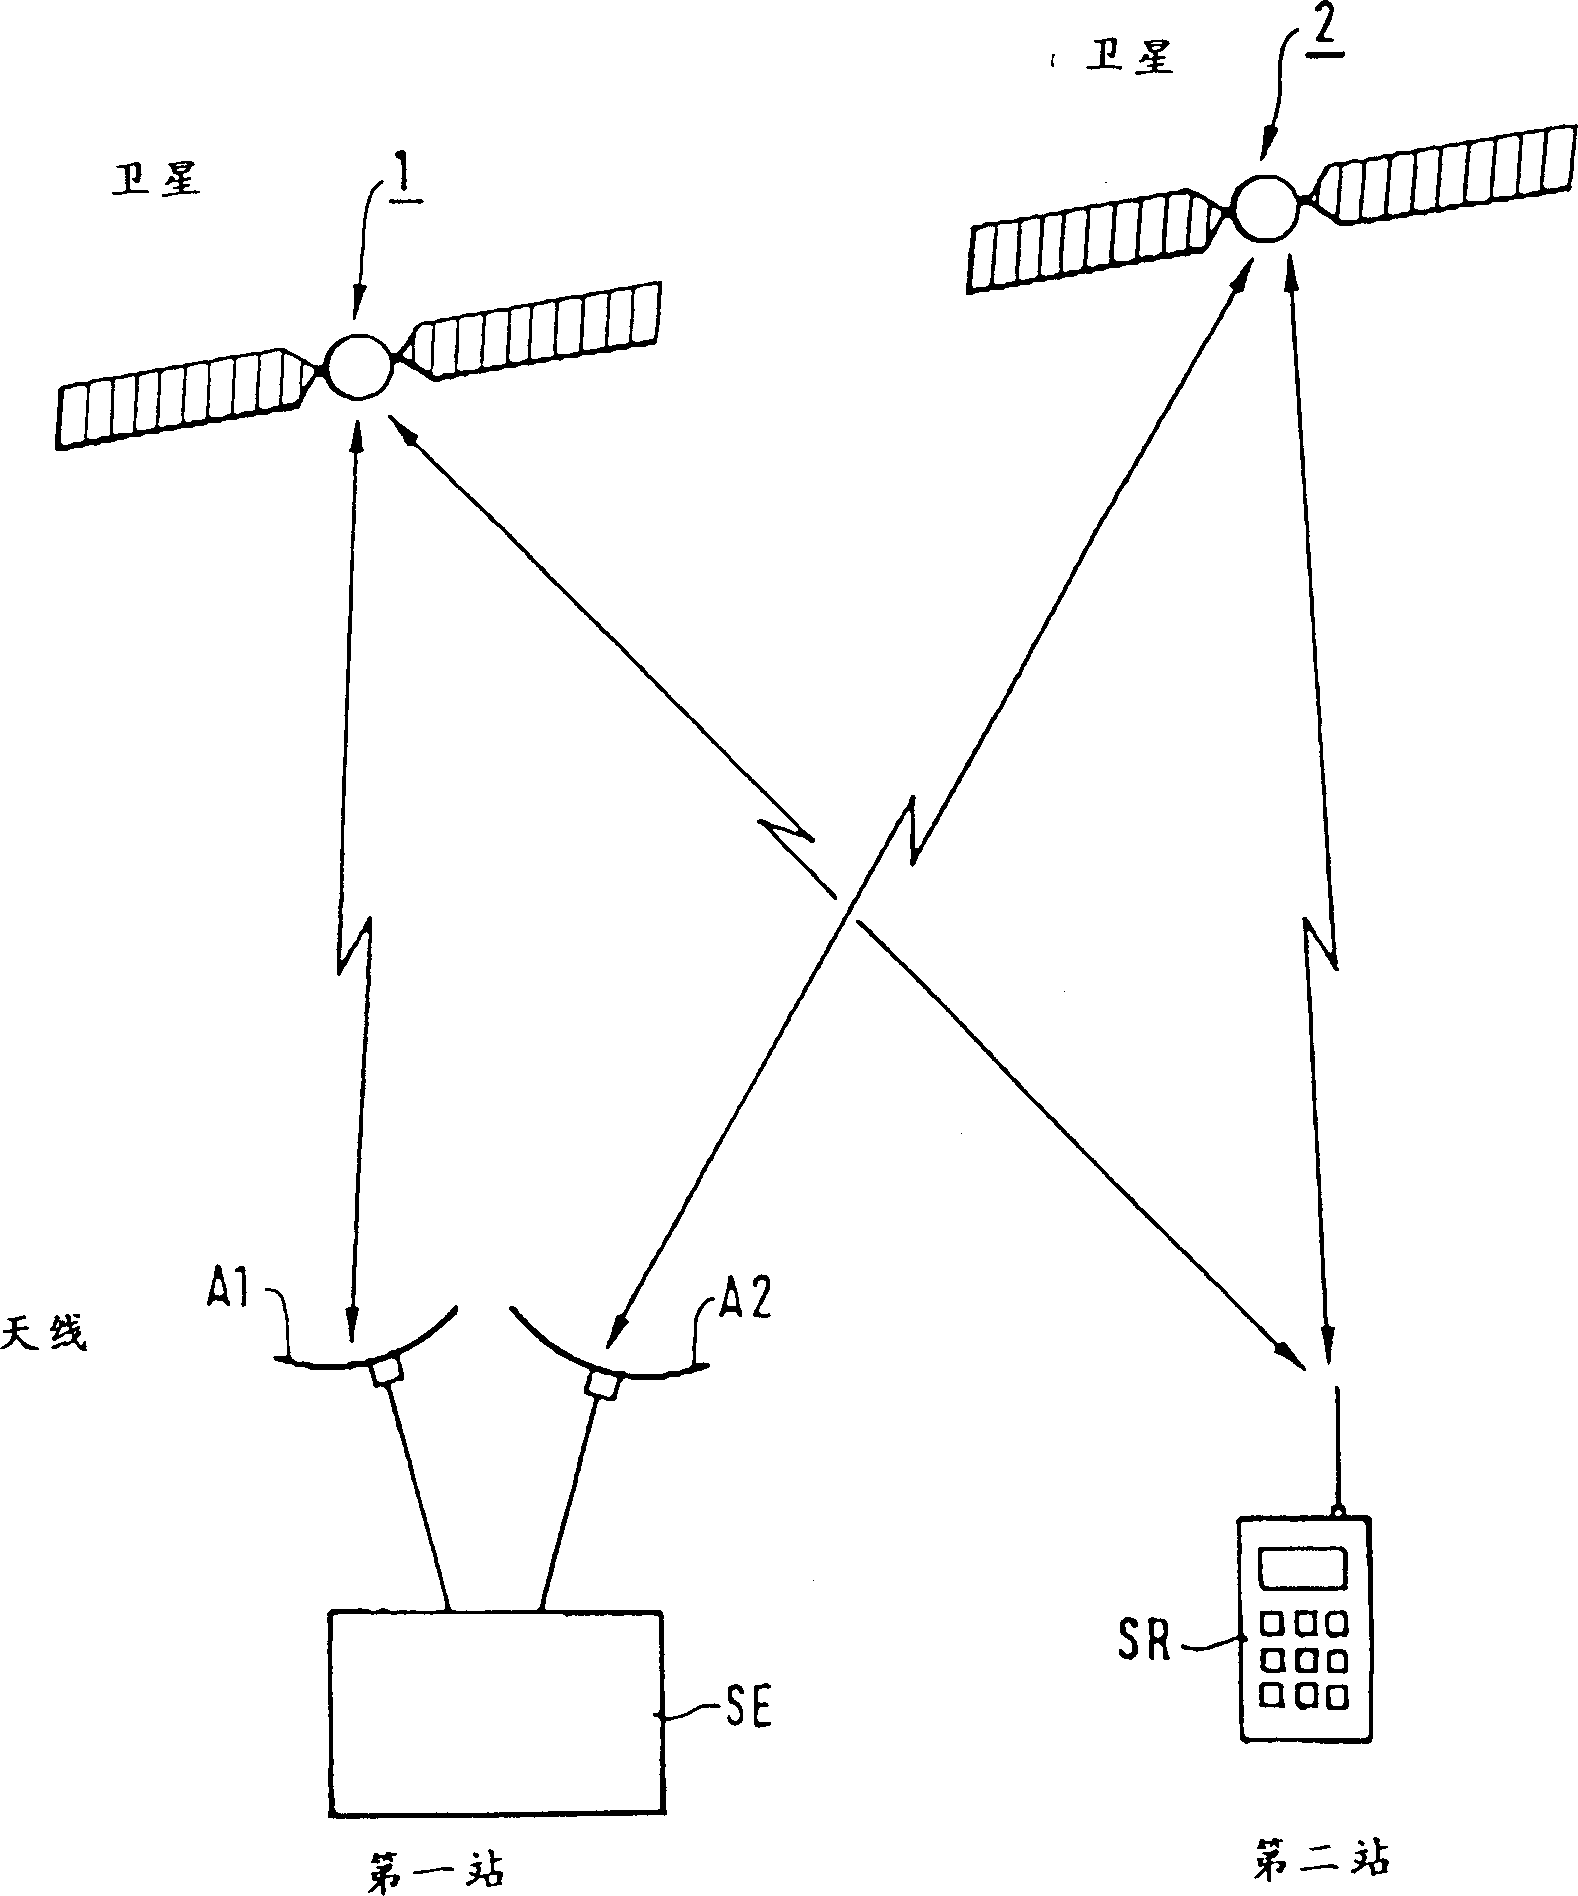 Method of power regulation in satellite telecommunication network with at least two satellites in view